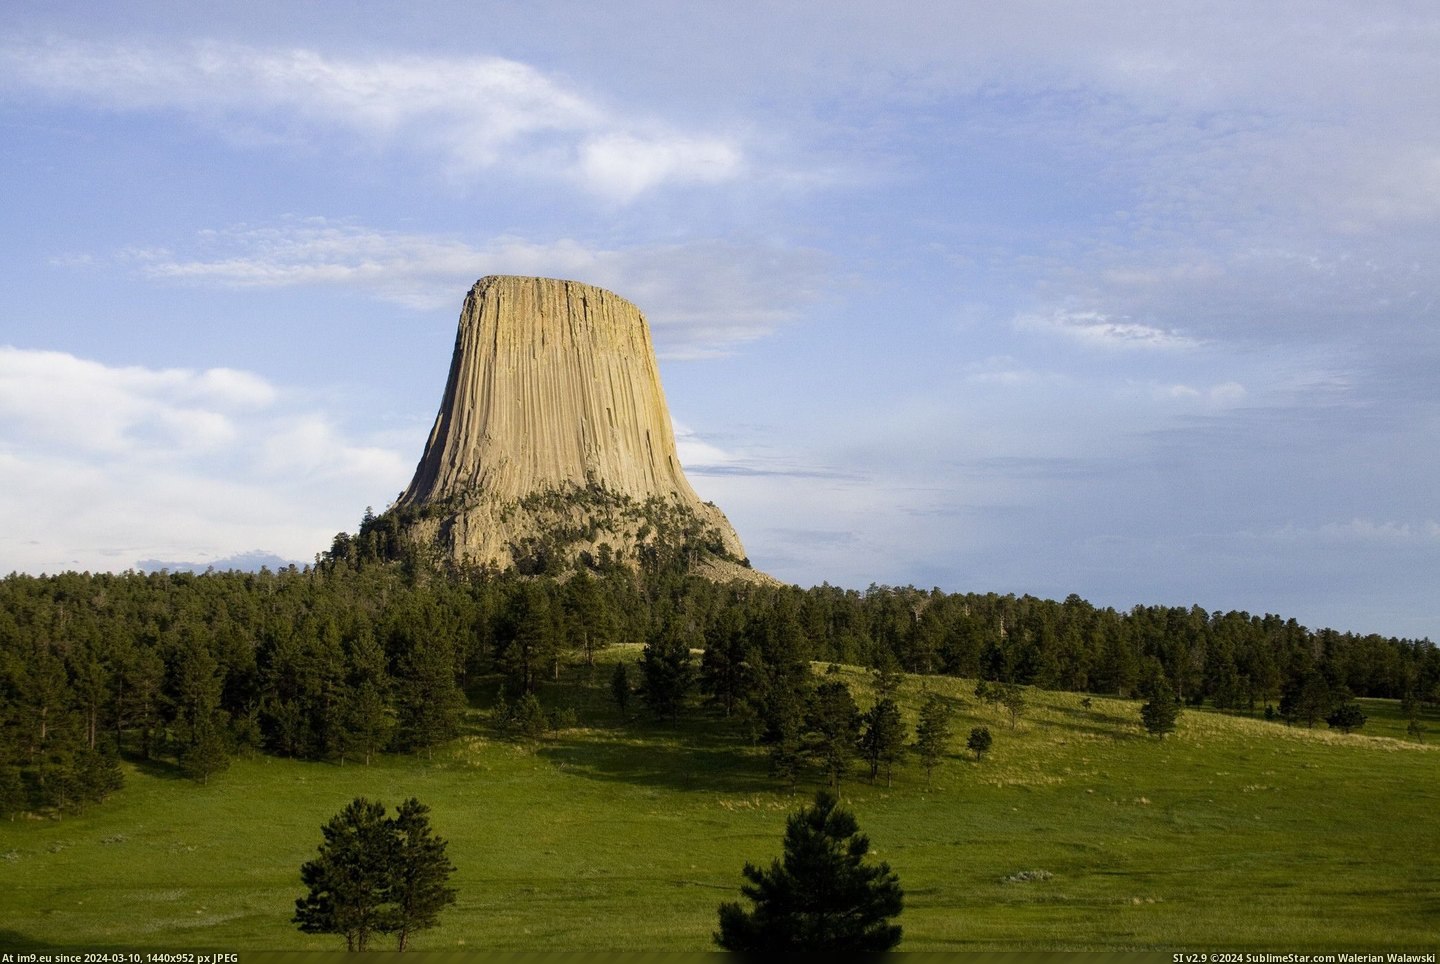 #Black #Tower #Wyoming #2100x1400 #Devil #Hills [Earthporn] Devil's Tower - Black Hills, Wyoming [2100x1400] Pic. (Изображение из альбом My r/EARTHPORN favs))